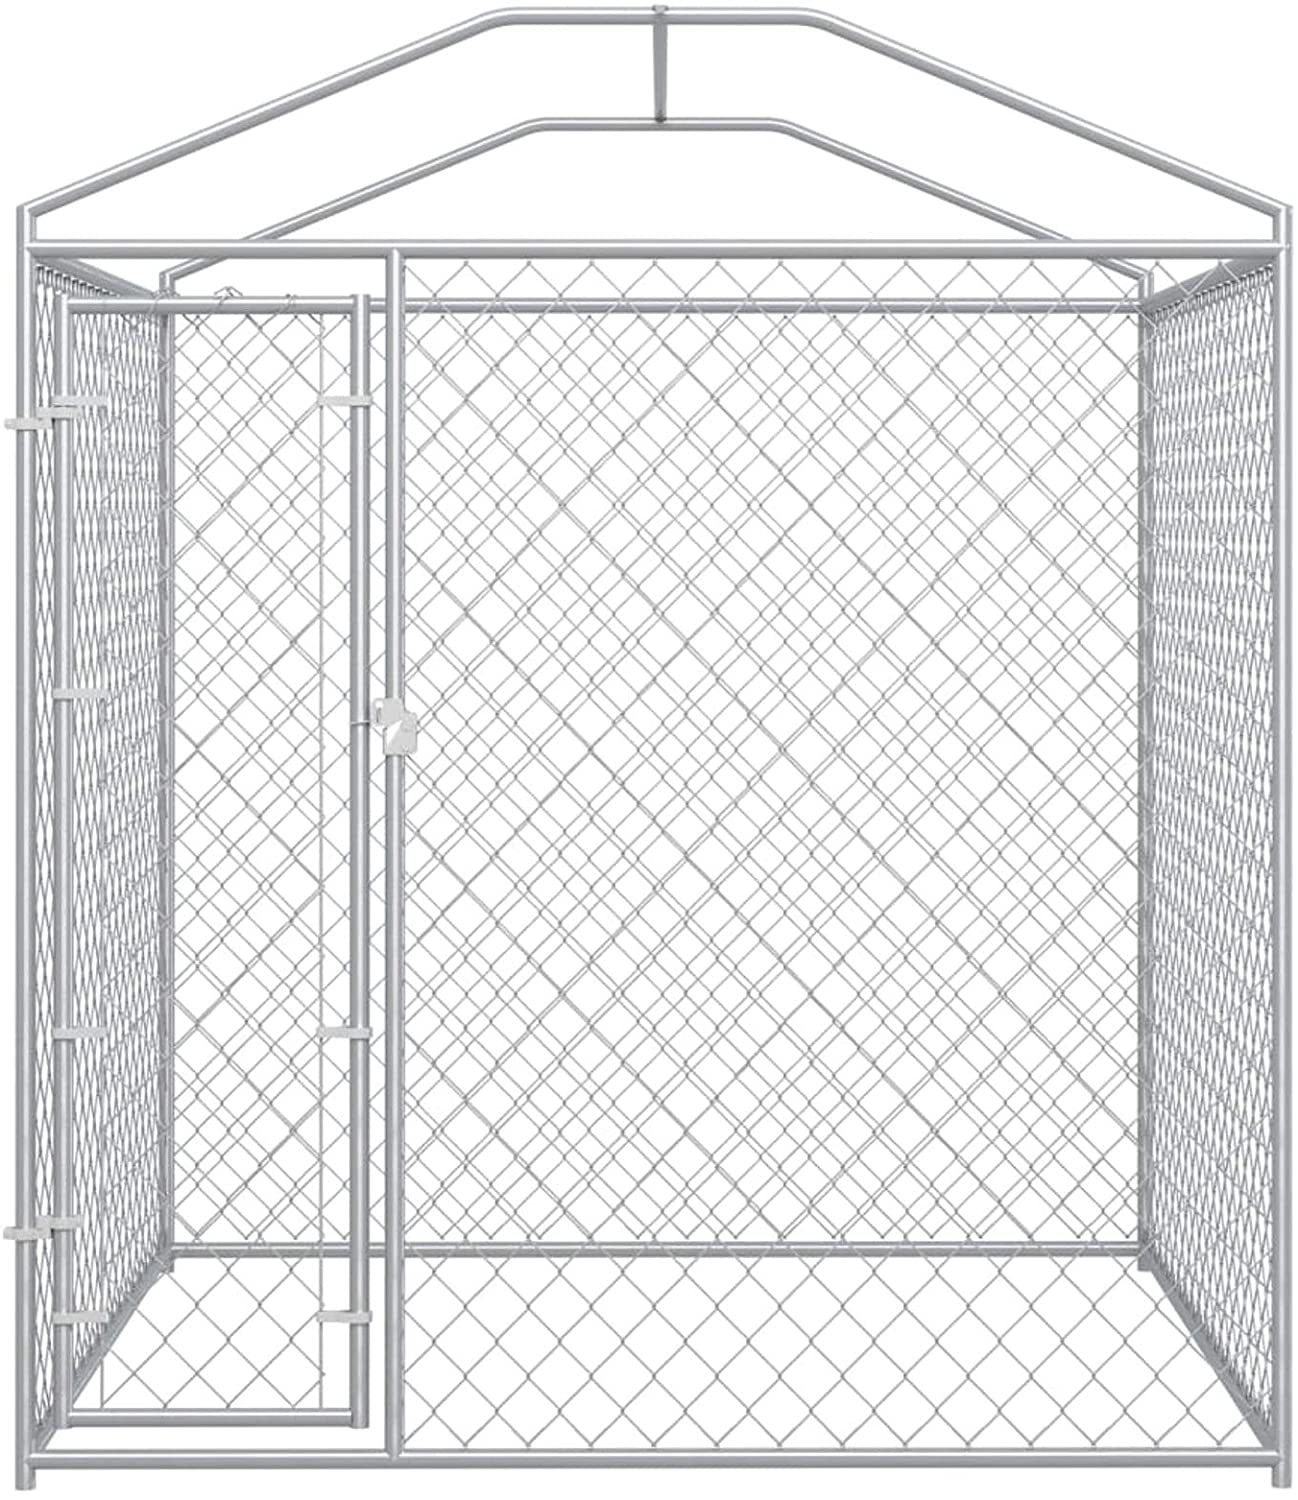 Tidyard Outdoor Dog Kennel Cage with Roof Canopy Lockable Galvanized Steel Pet Run House Chain-Link Mesh Sidewalls Exercise Fence Barrier for Backyard Garden 76 X 76 X 88.6 Inches (L X W X H)